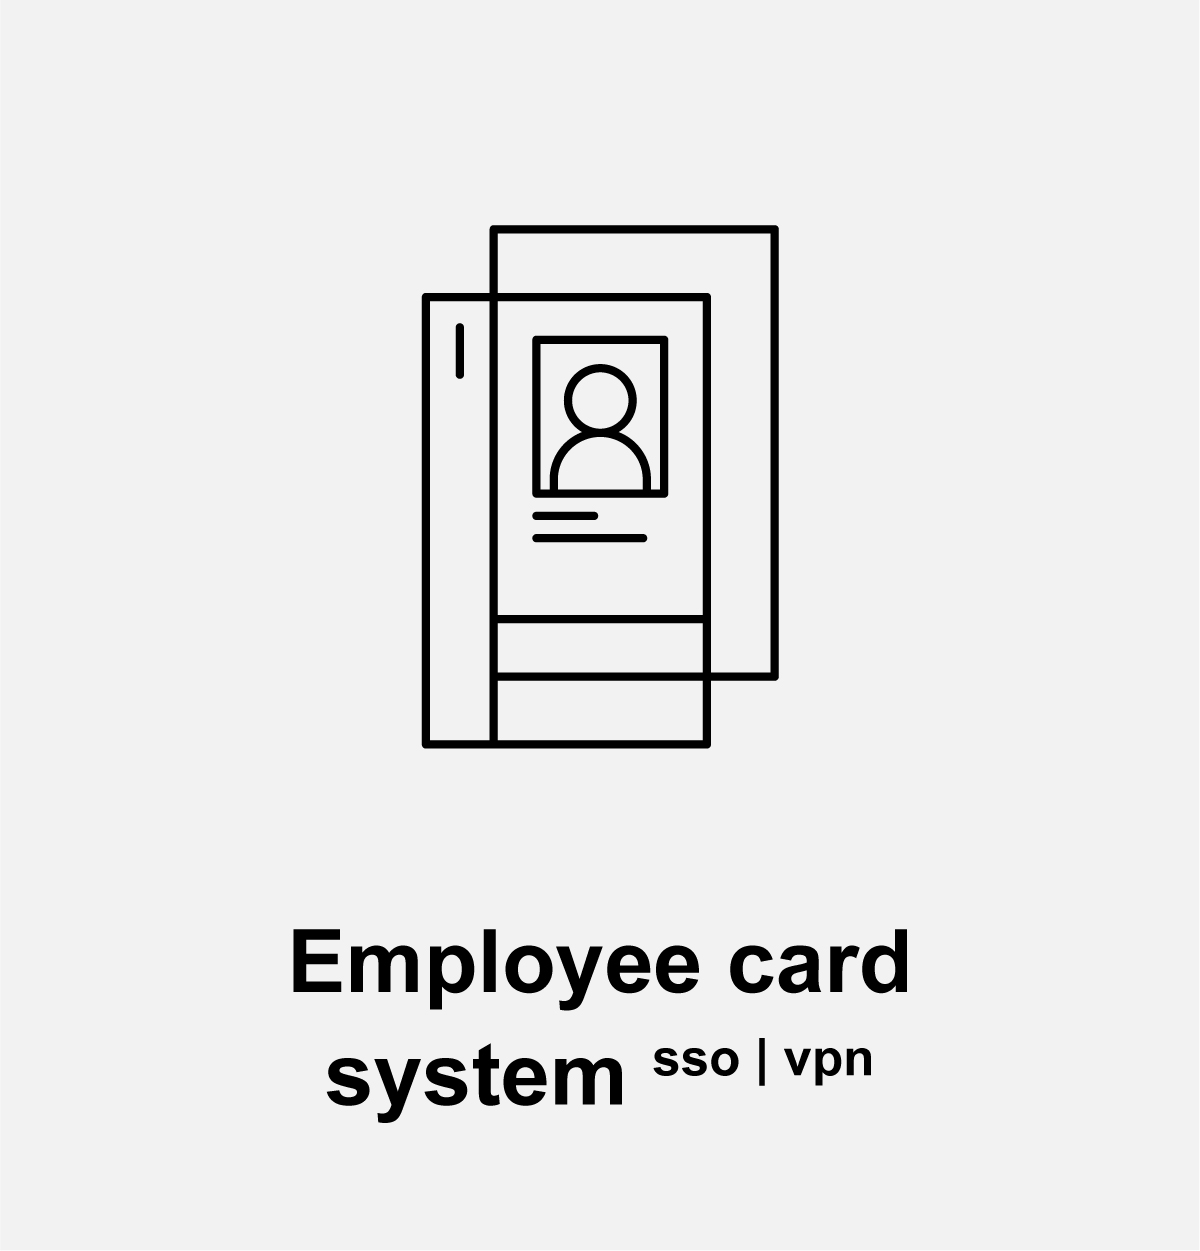 Employee card system